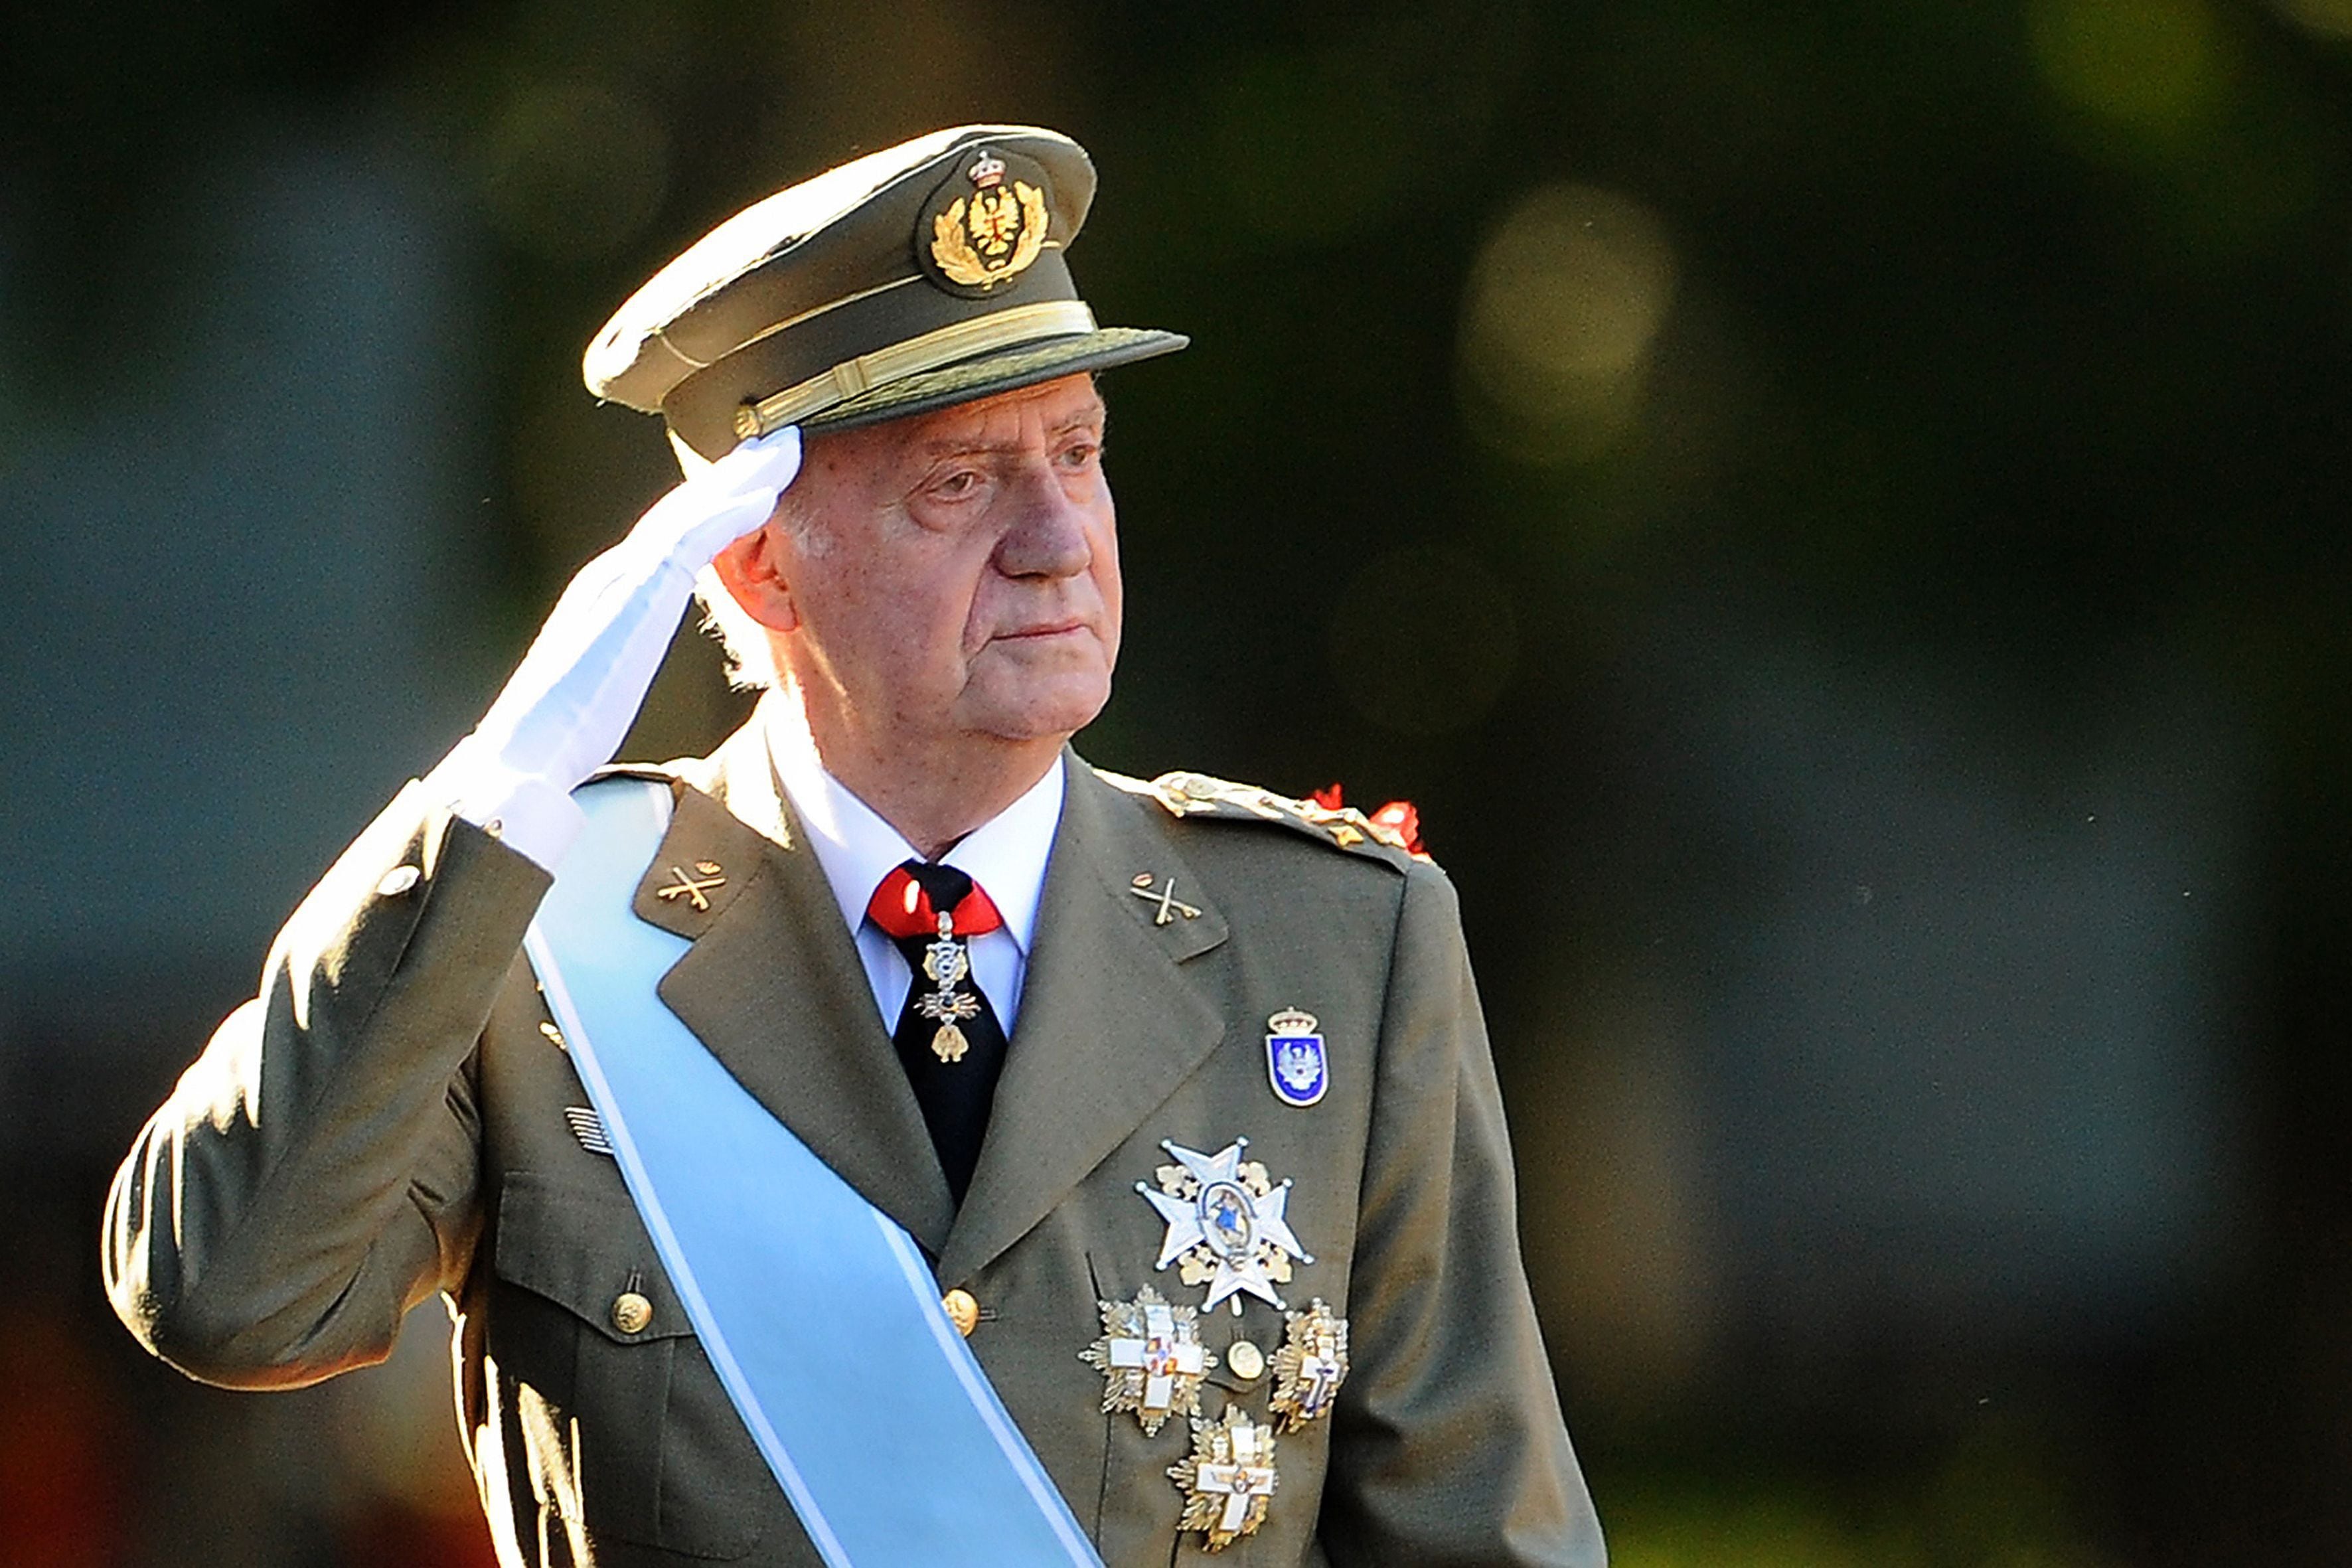 The once respectable image of King Emeritus Juan Carlos I has been tarnished by the multiple corruption and infidelity scandals that have marred him in recent years.  / AFP